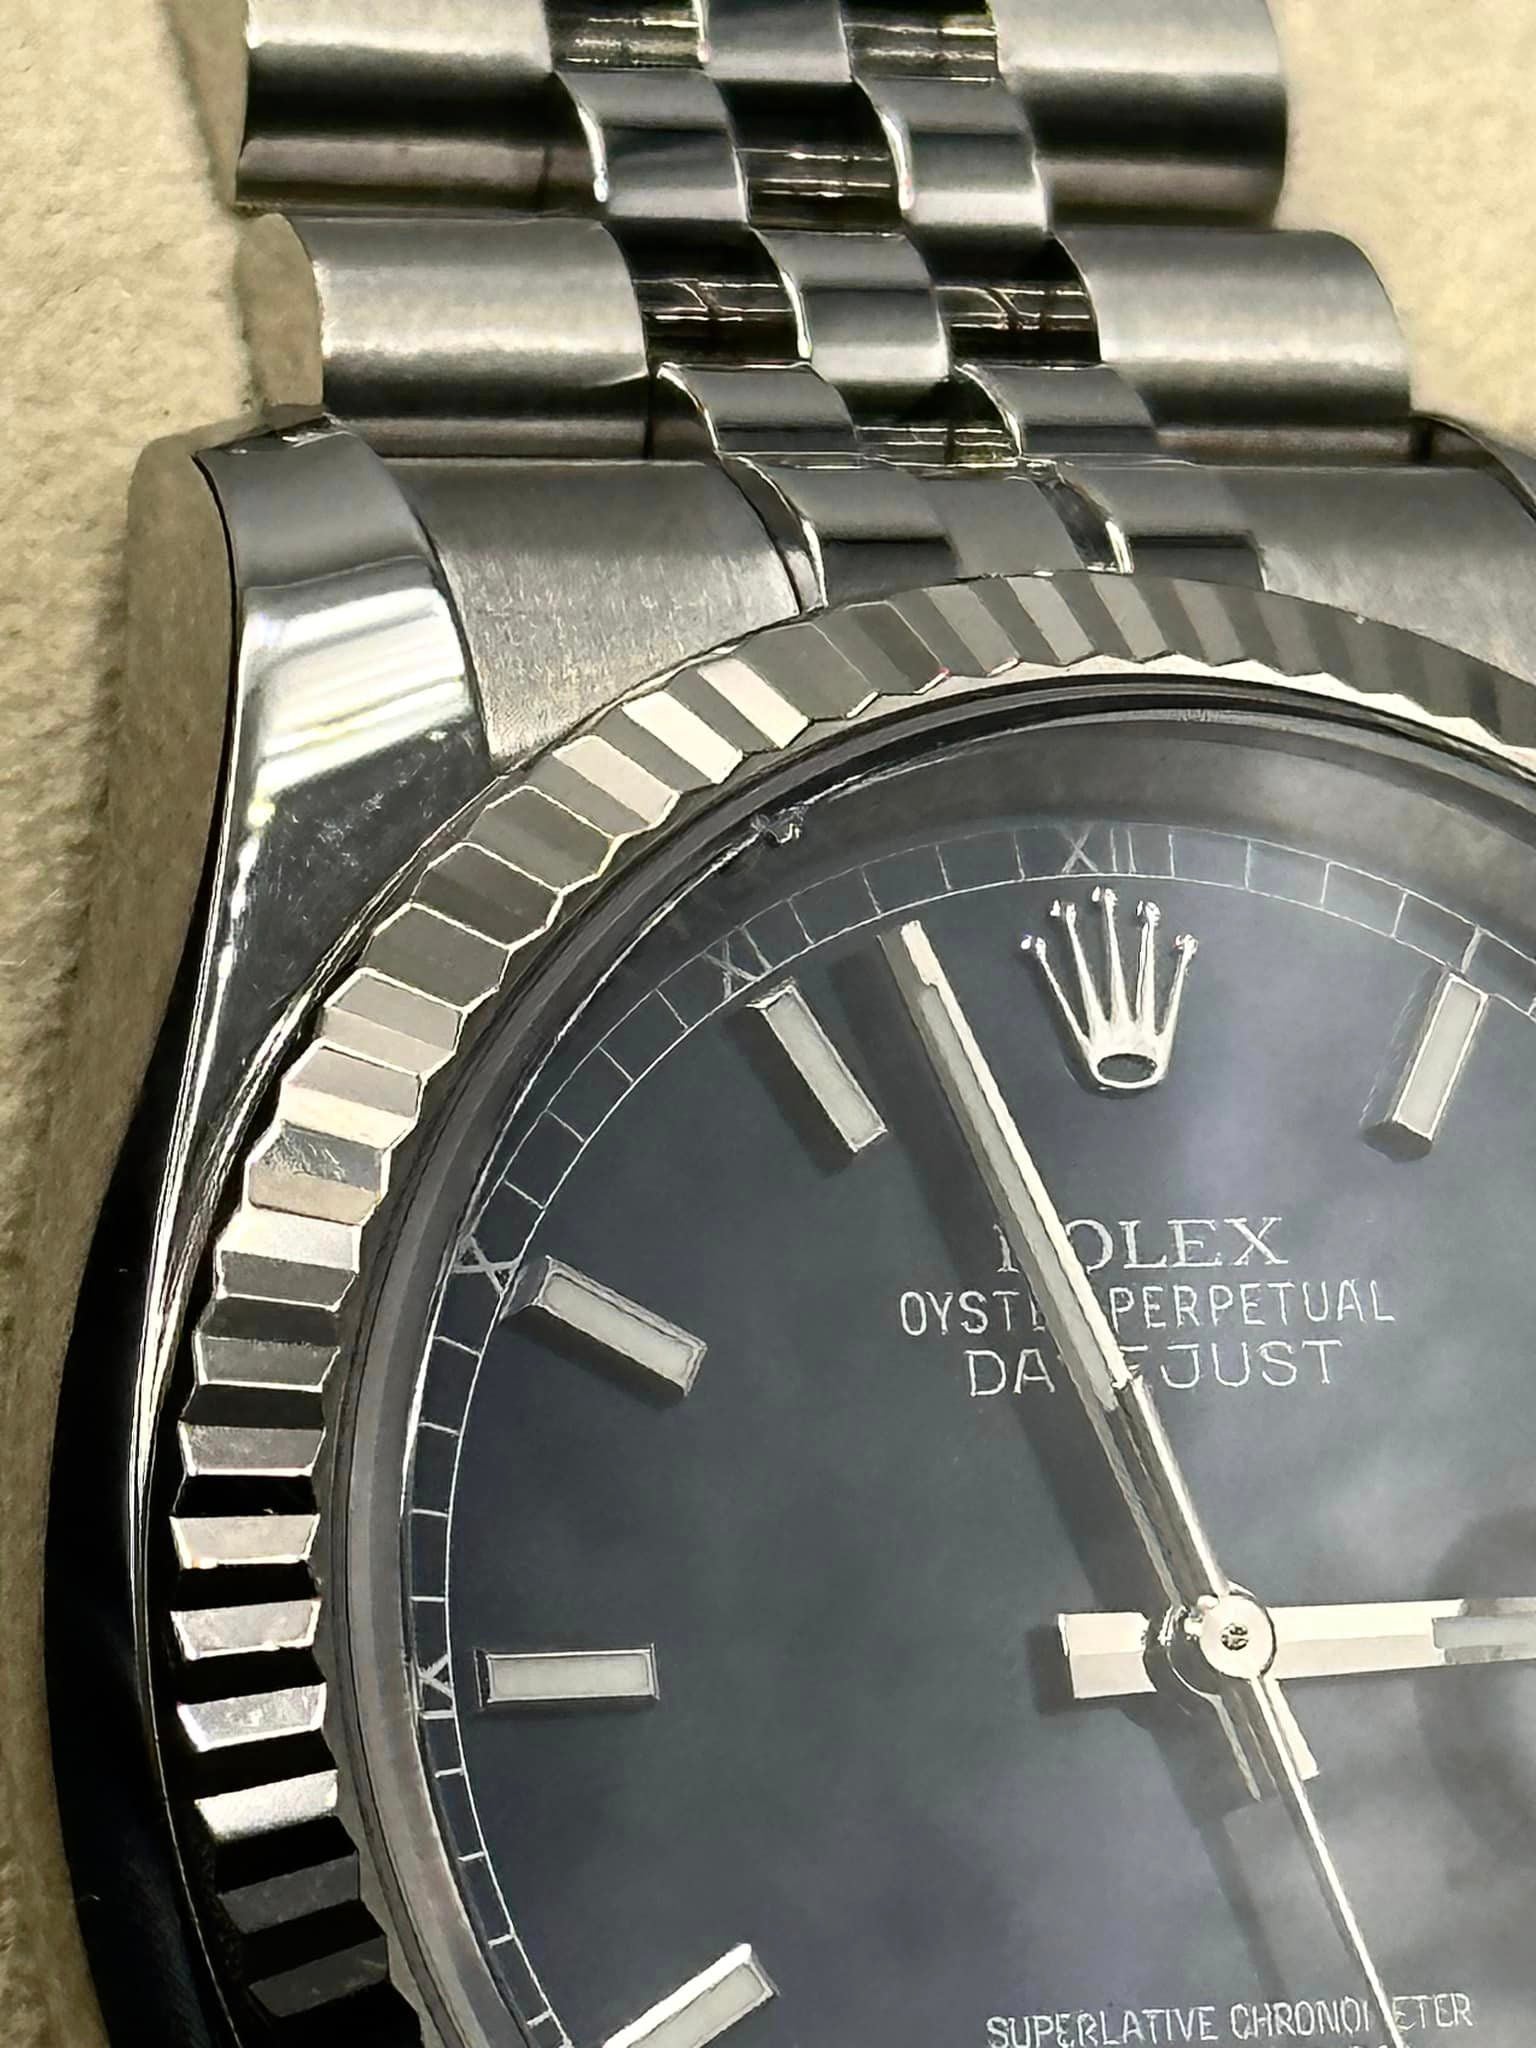 2018 Rolex Datejust 36mm 116234 Jubilee Blue Stick Roulette Date Dial - MyWatchLLC